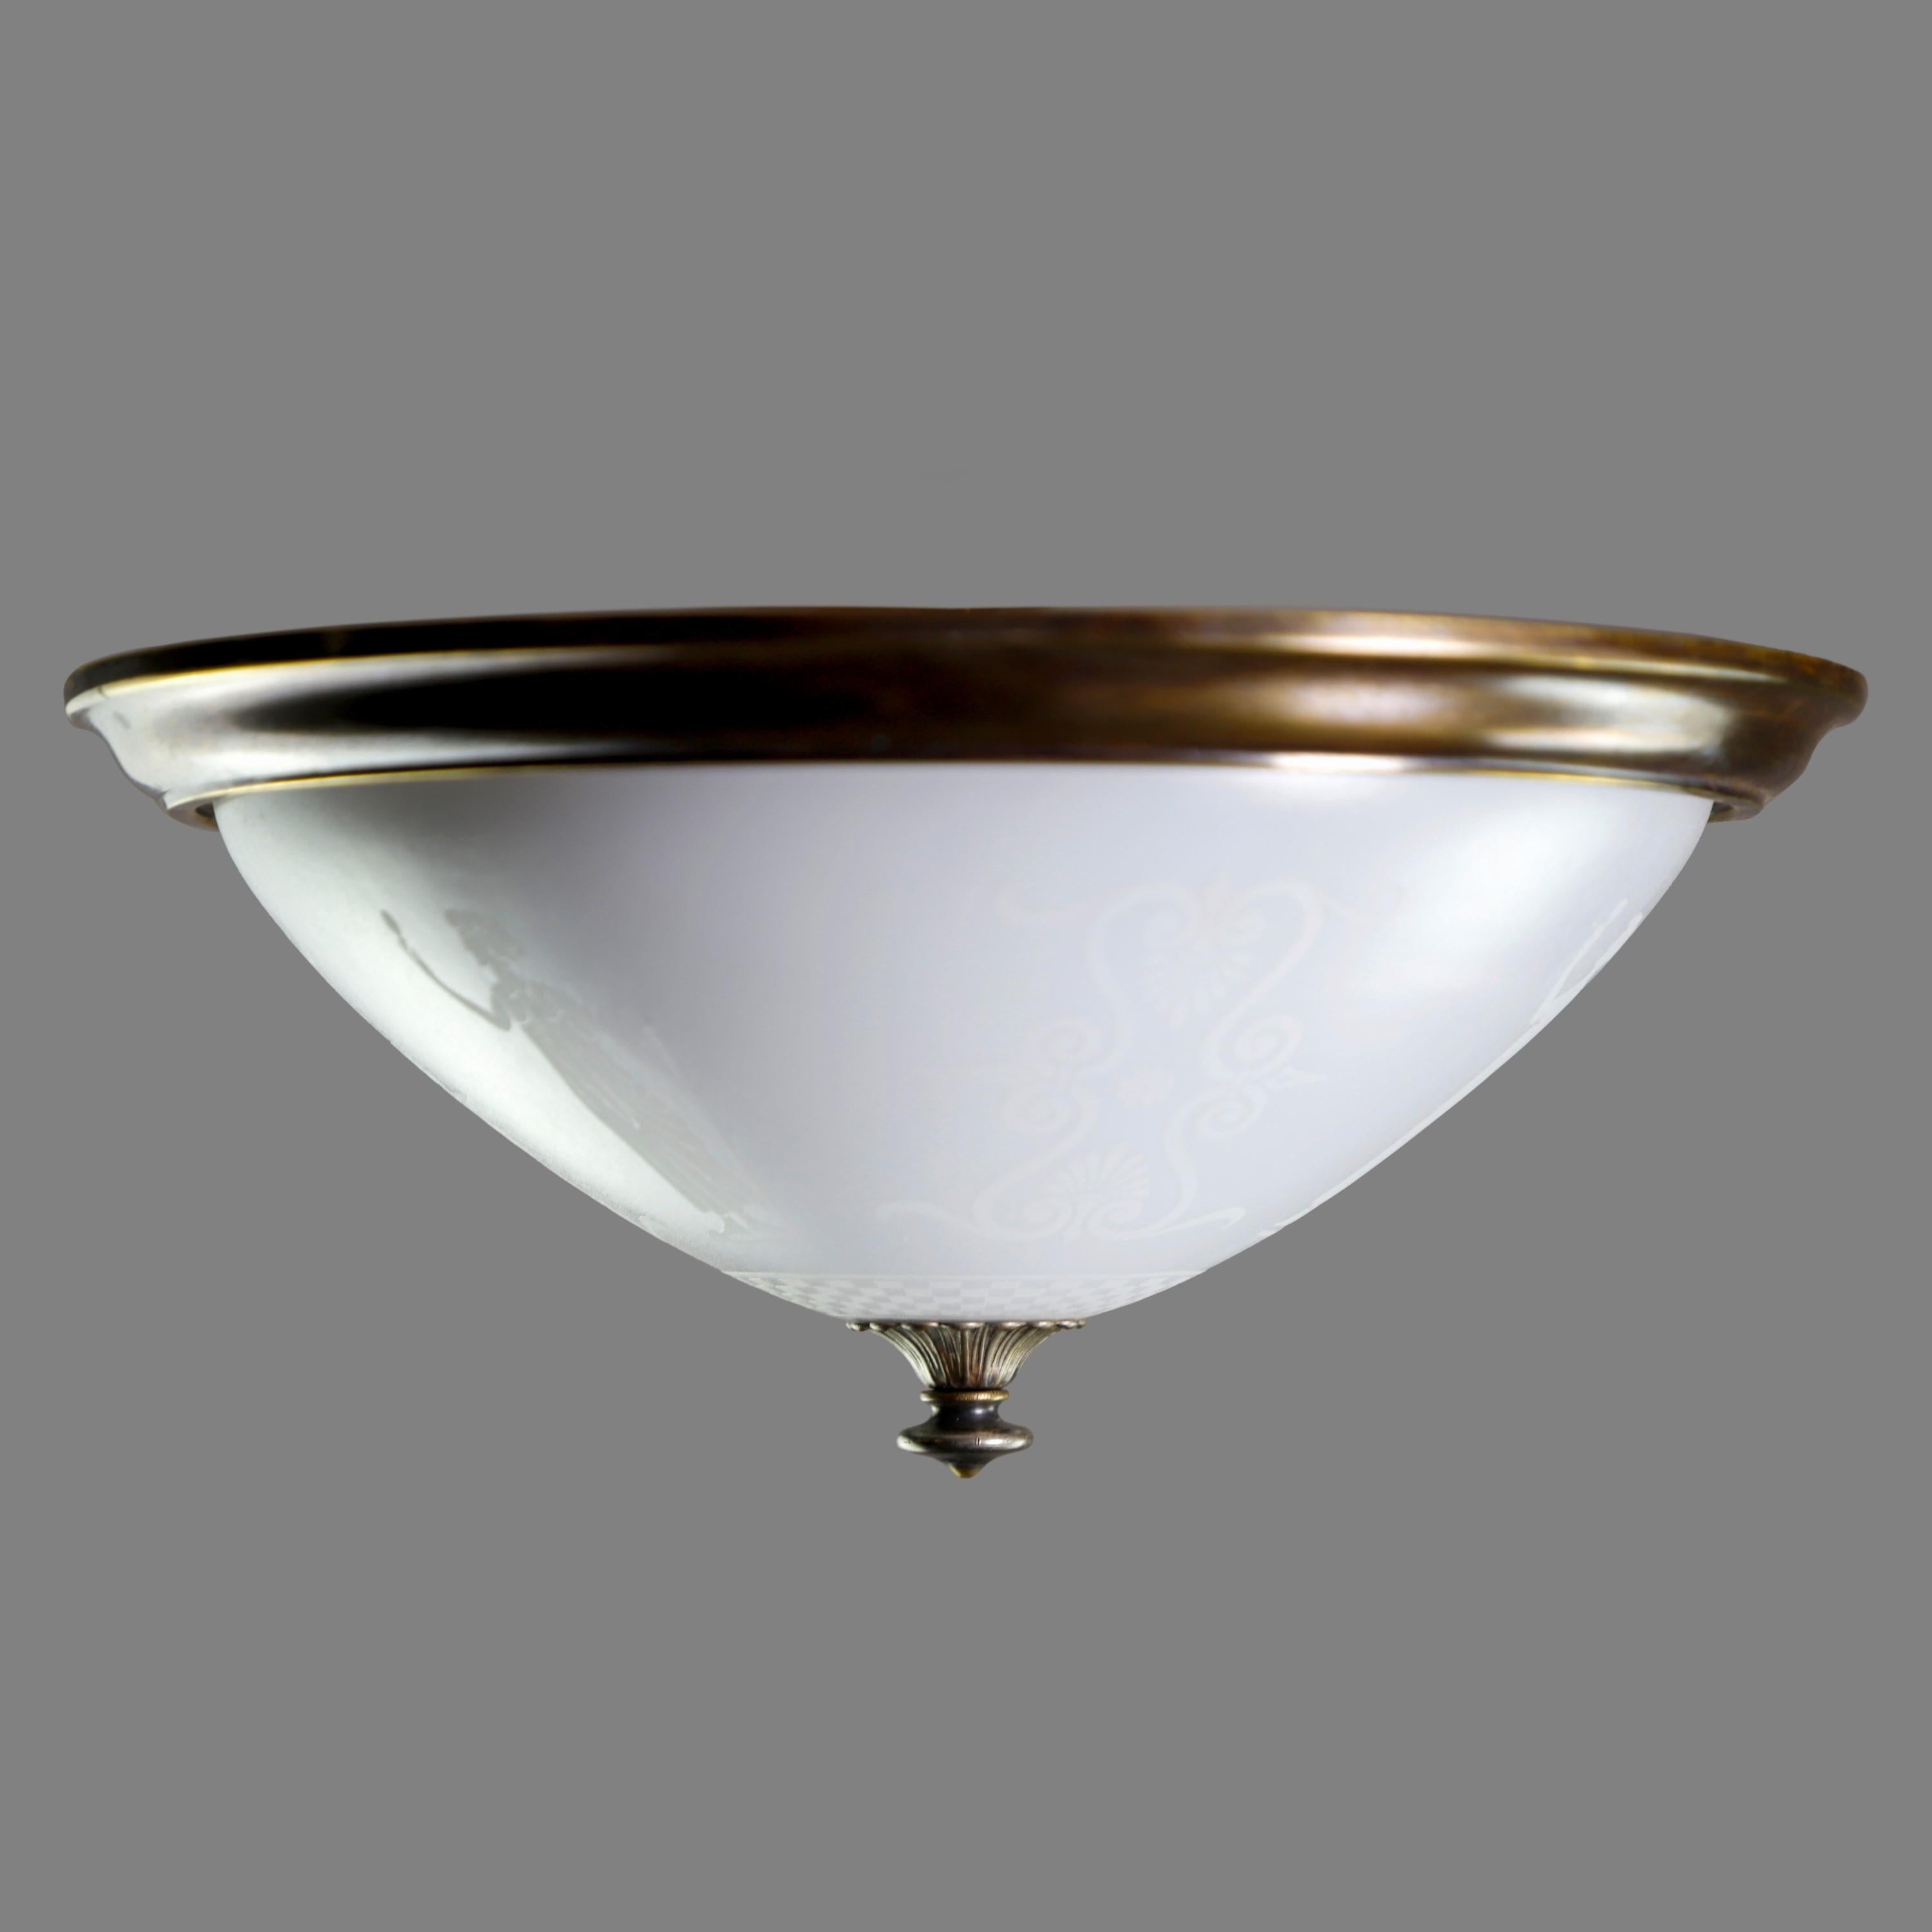 White glass flush mount dome shaped light with a bronze frame and finial. The glass is decorated with ornate and Greek figural designs. This takes two E-26 bulbs. Cleaned and restored. Small quantity available at time of posting. Please inquire.